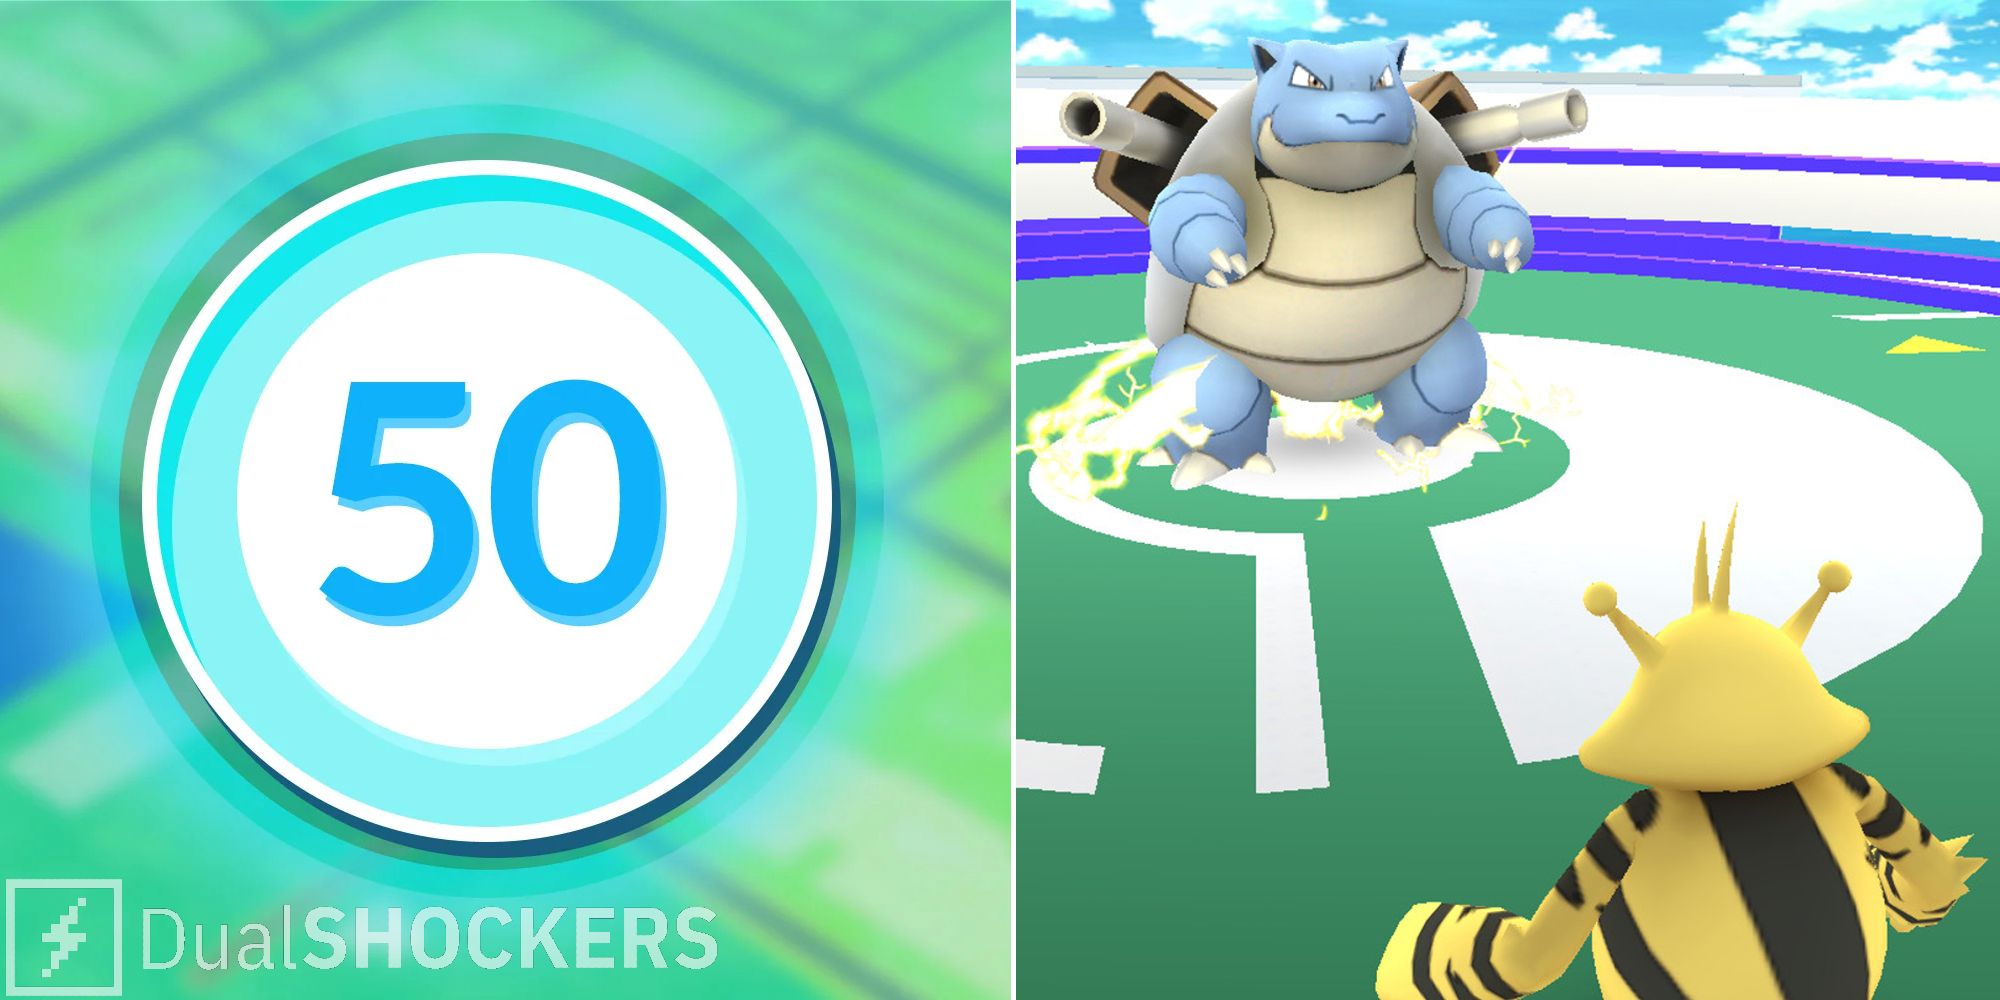 How To Get More XP & Level Up Fast In Pokémon GO